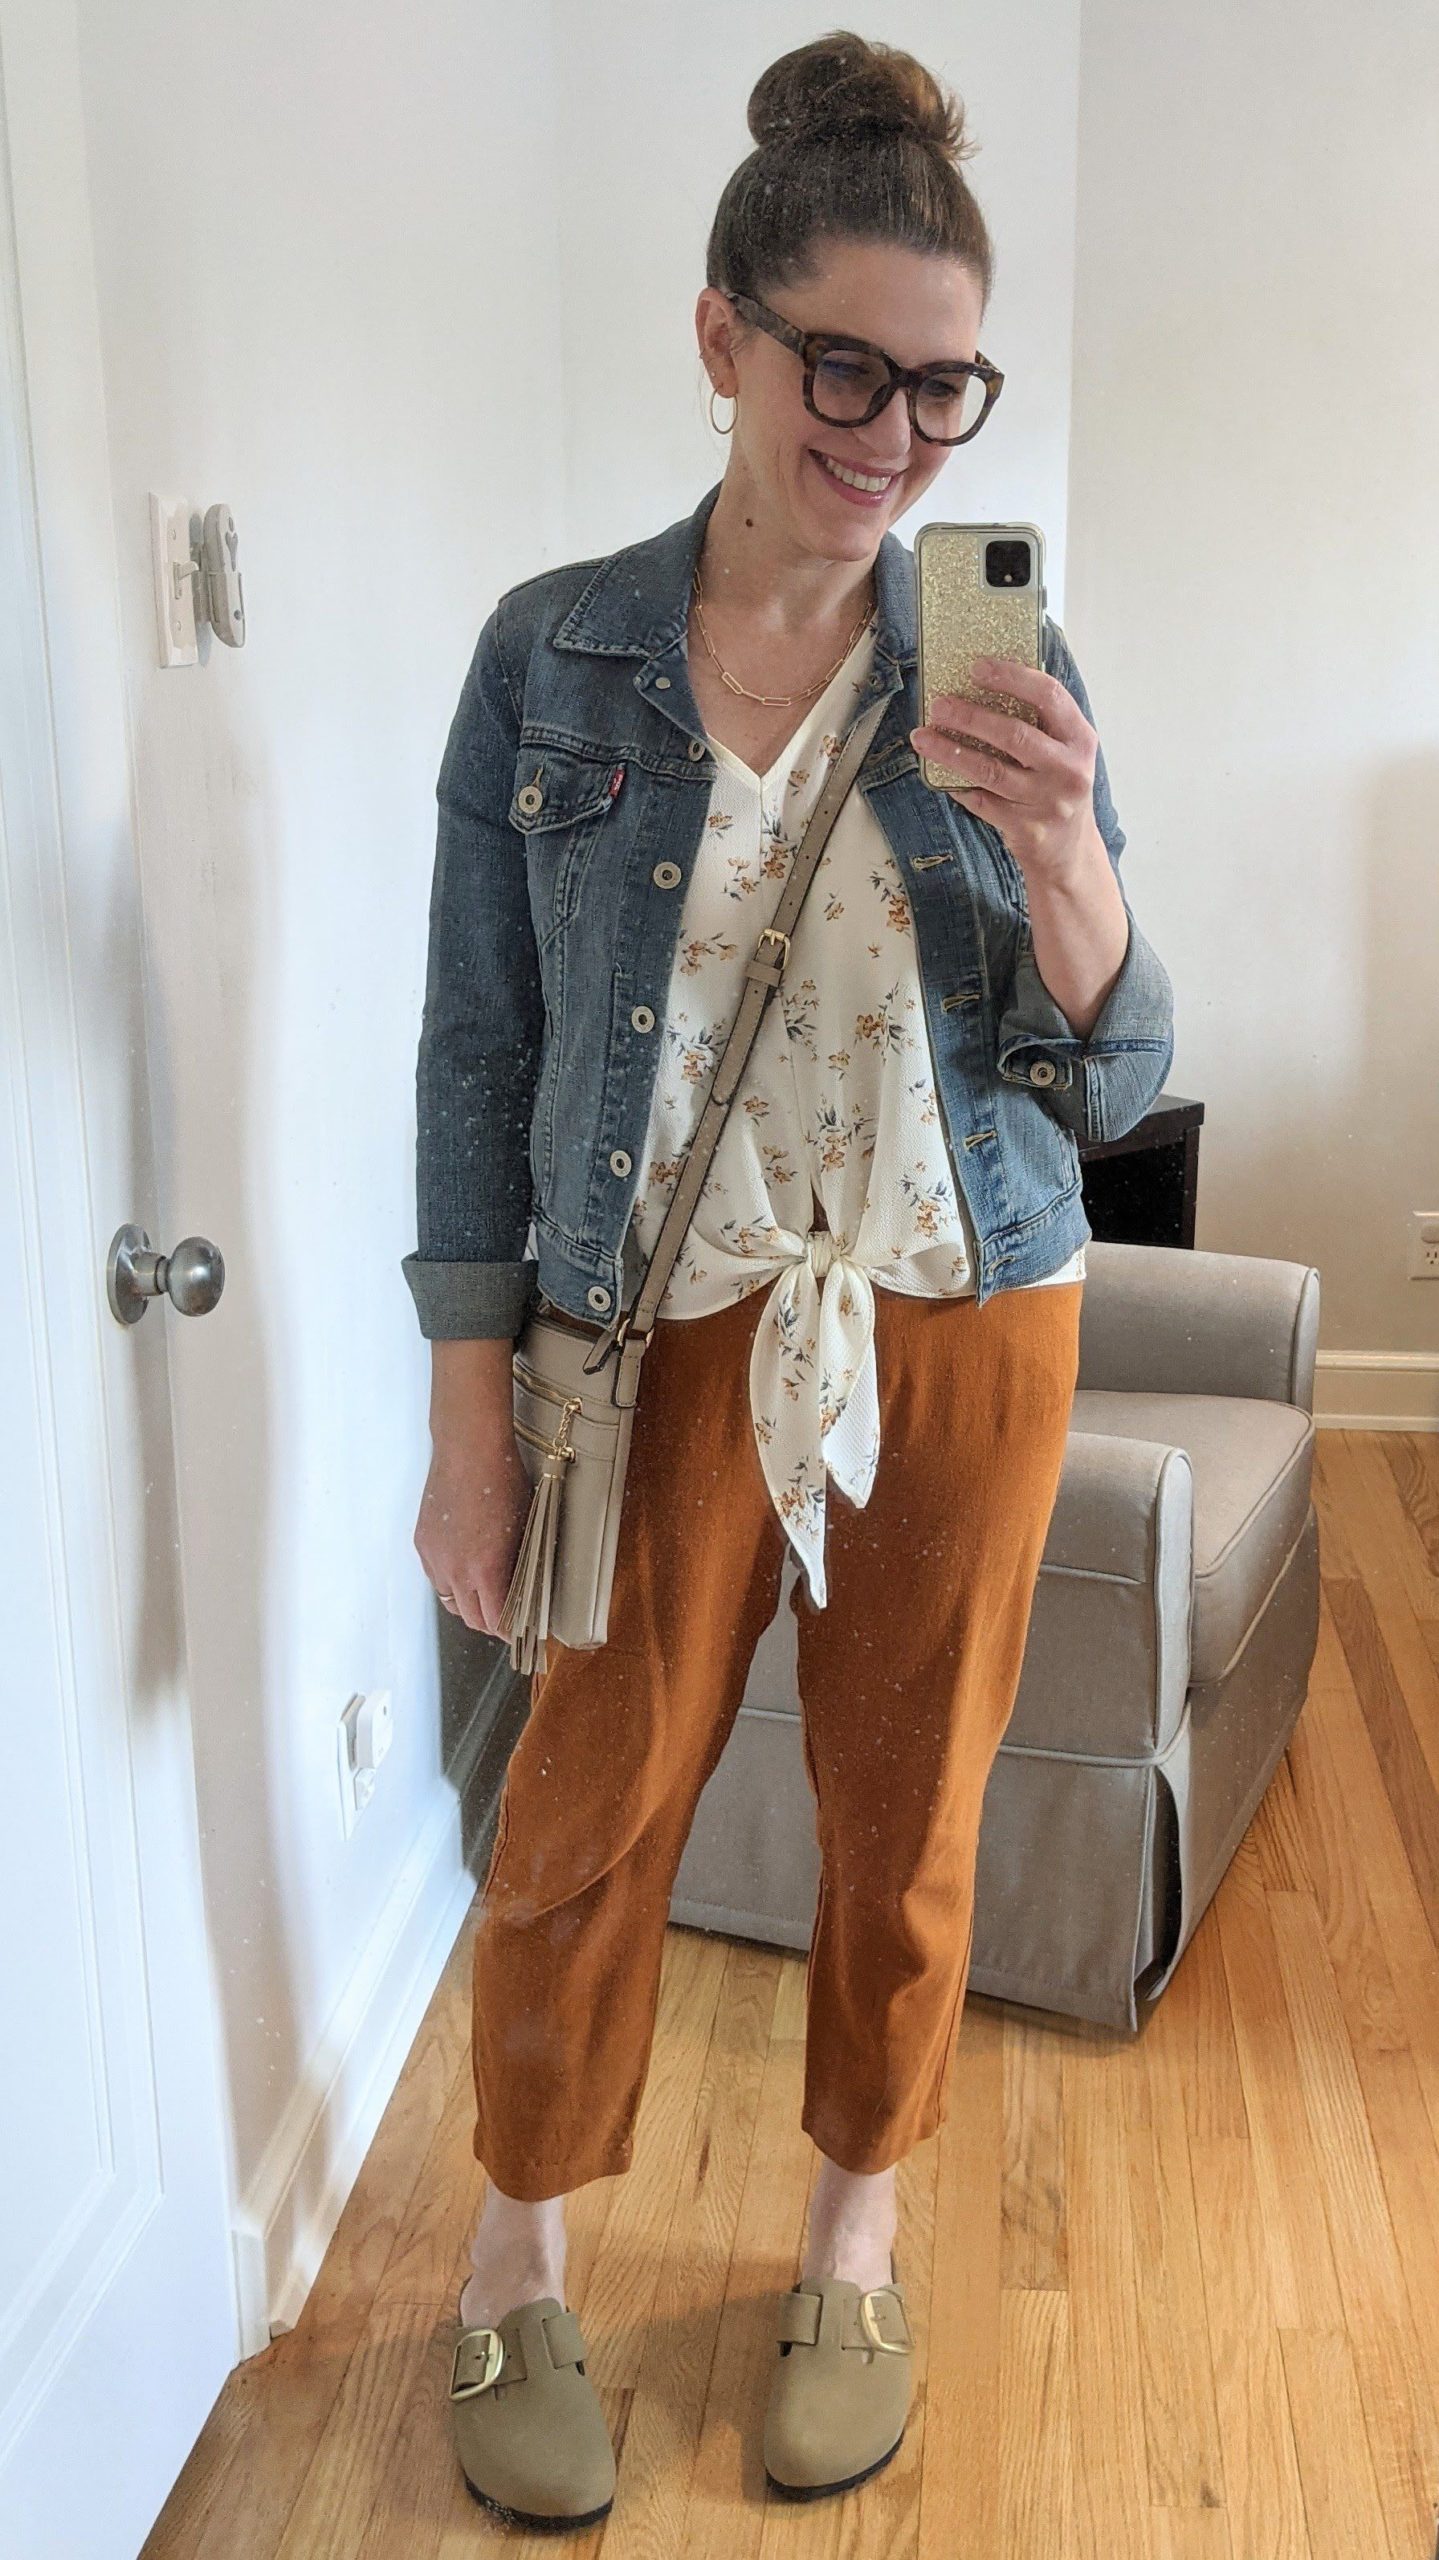 Smiling woman with brunette hair in a bun and glasses taking a full body selfie of her outfit - denim jacket, floral tie blouse, orange pants and flats